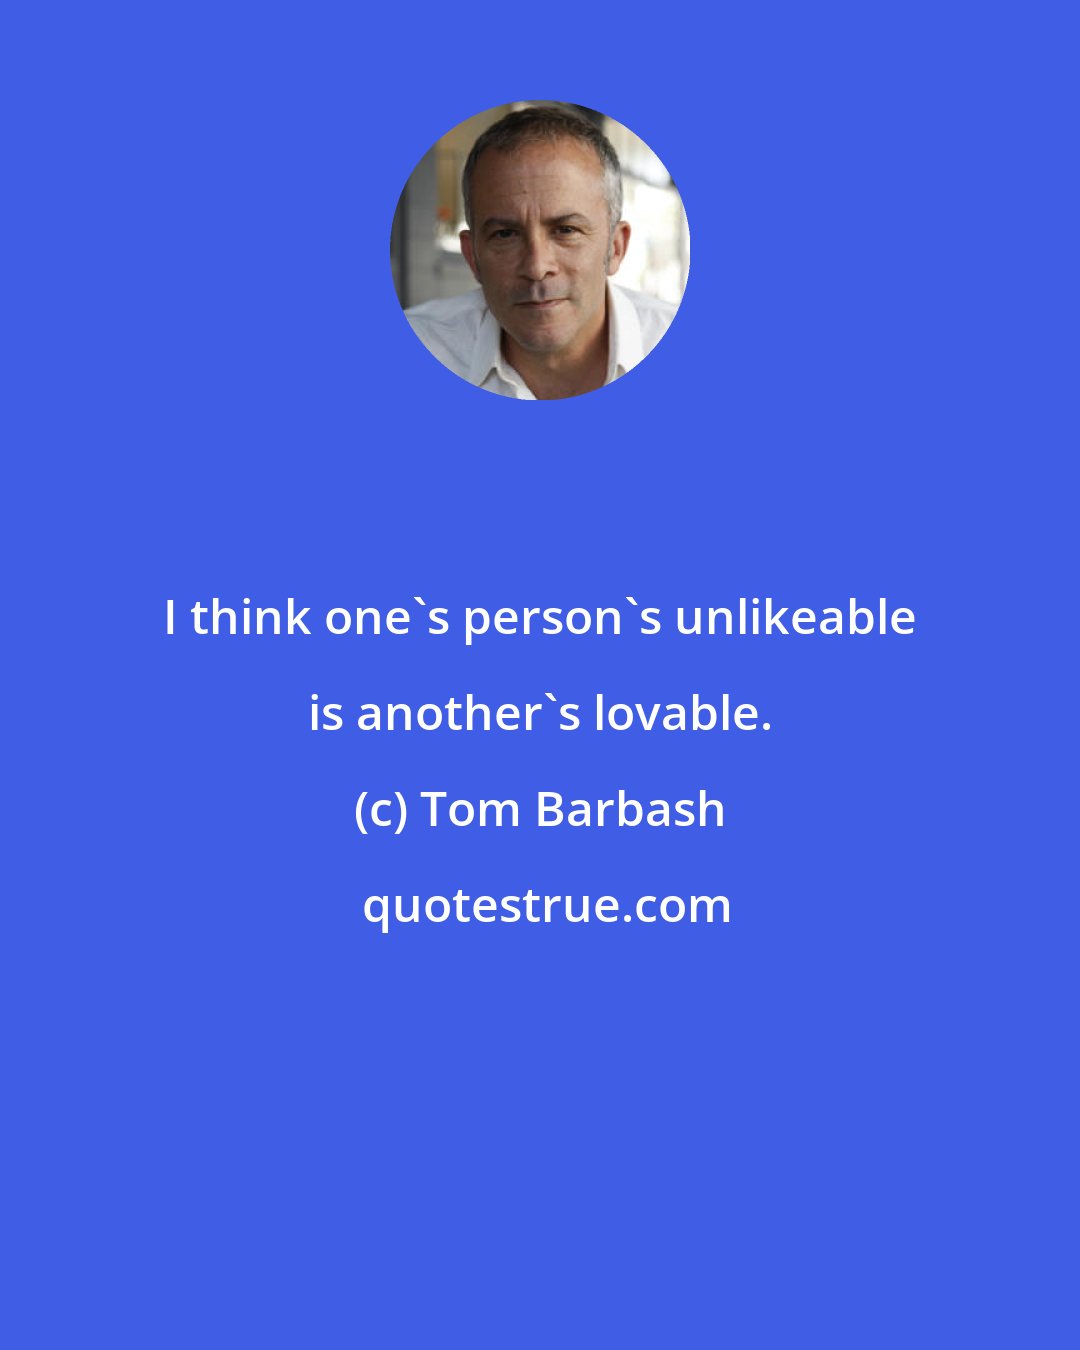 Tom Barbash: I think one's person's unlikeable is another's lovable.